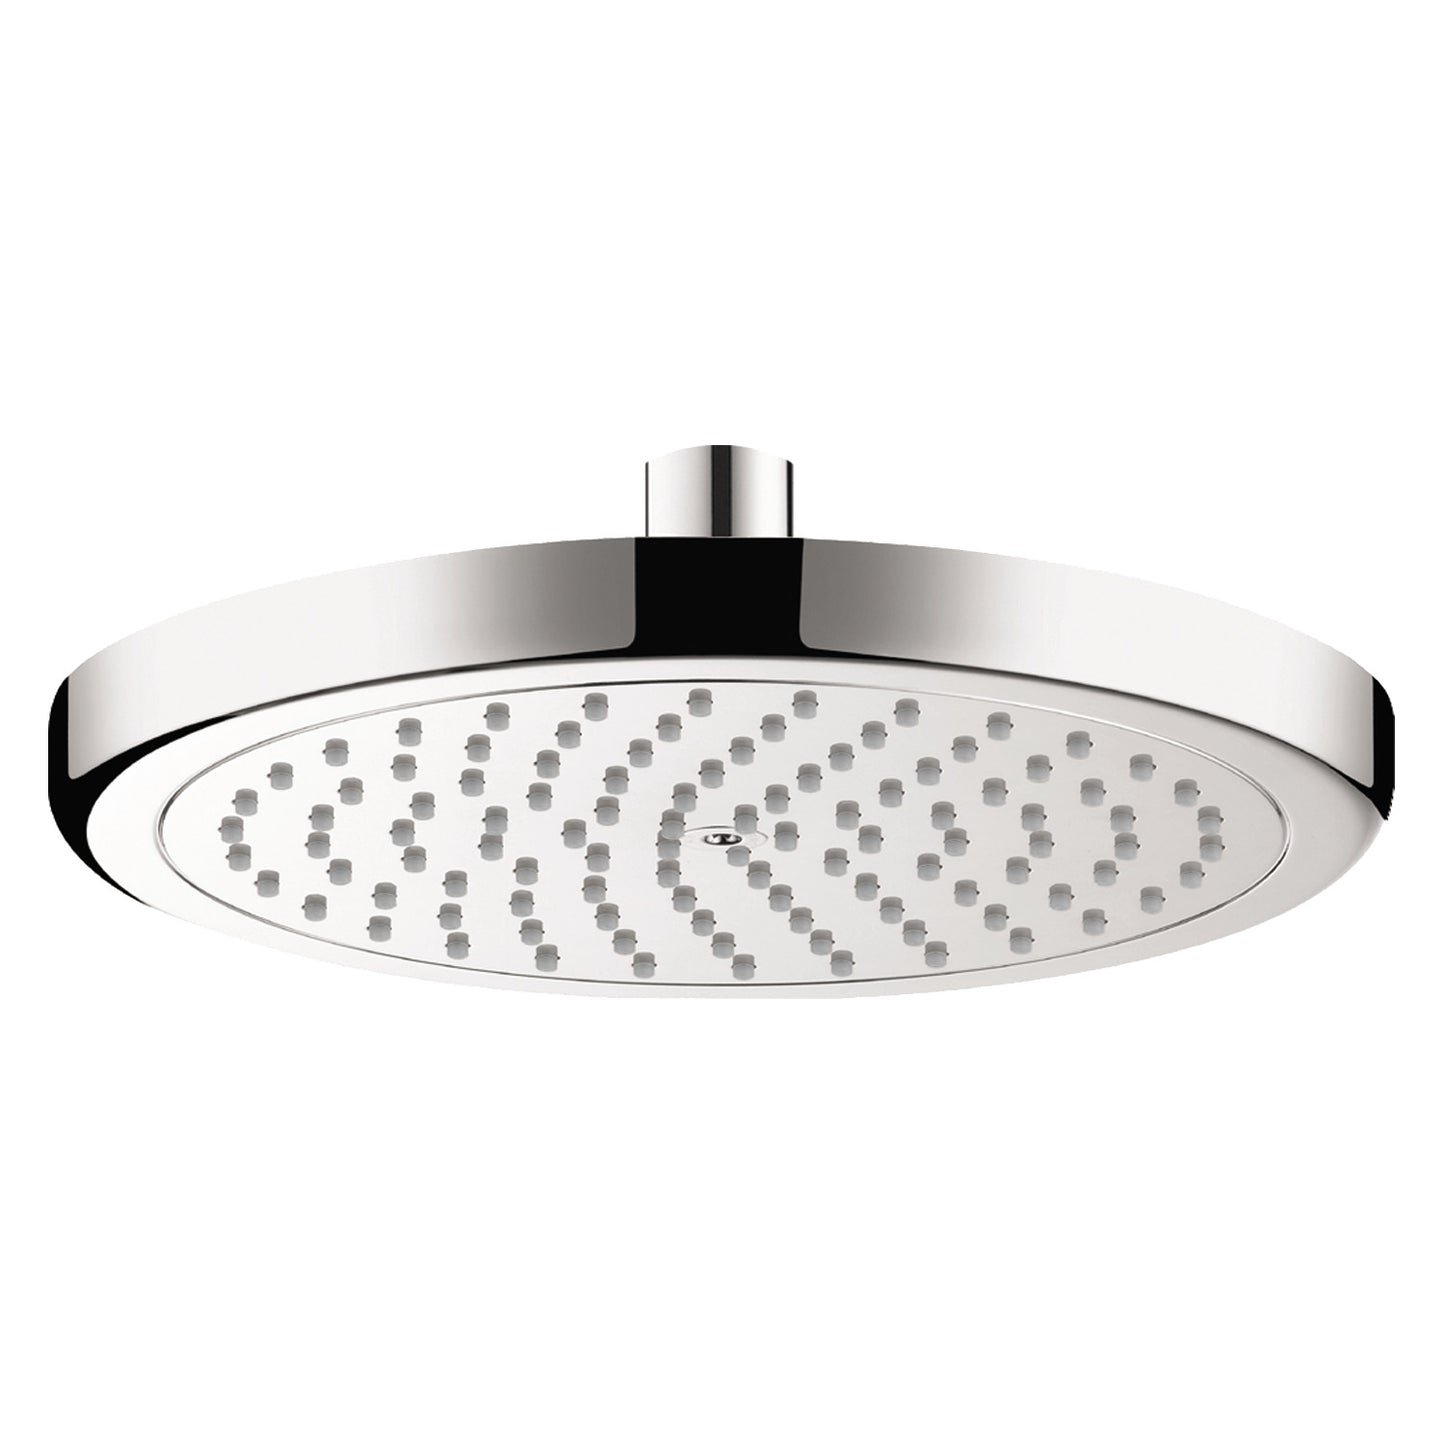 HANSGROHE 26478001 Croma Showerhead 220 1-Jet, 2.0 GPM in Chrome